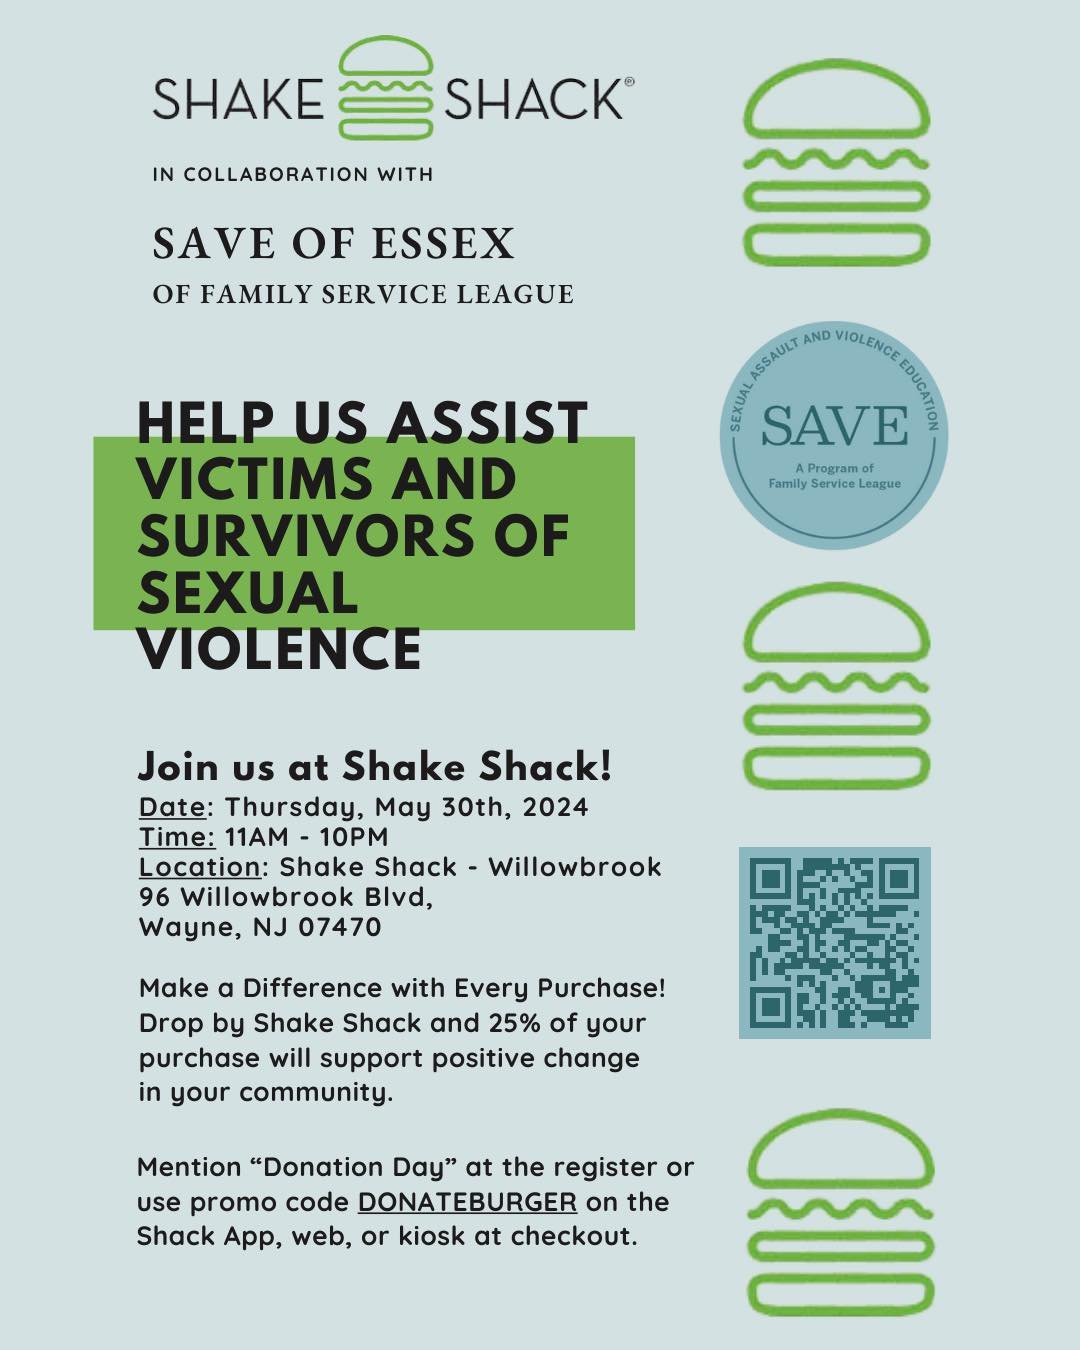 Want to contribute to your community while enjoying amazing food? Now you can! Check us out at the Wayne Shake Shack on May 30th.
When you use the code &ldquo;Donation Day&rdquo; at the register, 25% of your purchase will go towards helping survivors